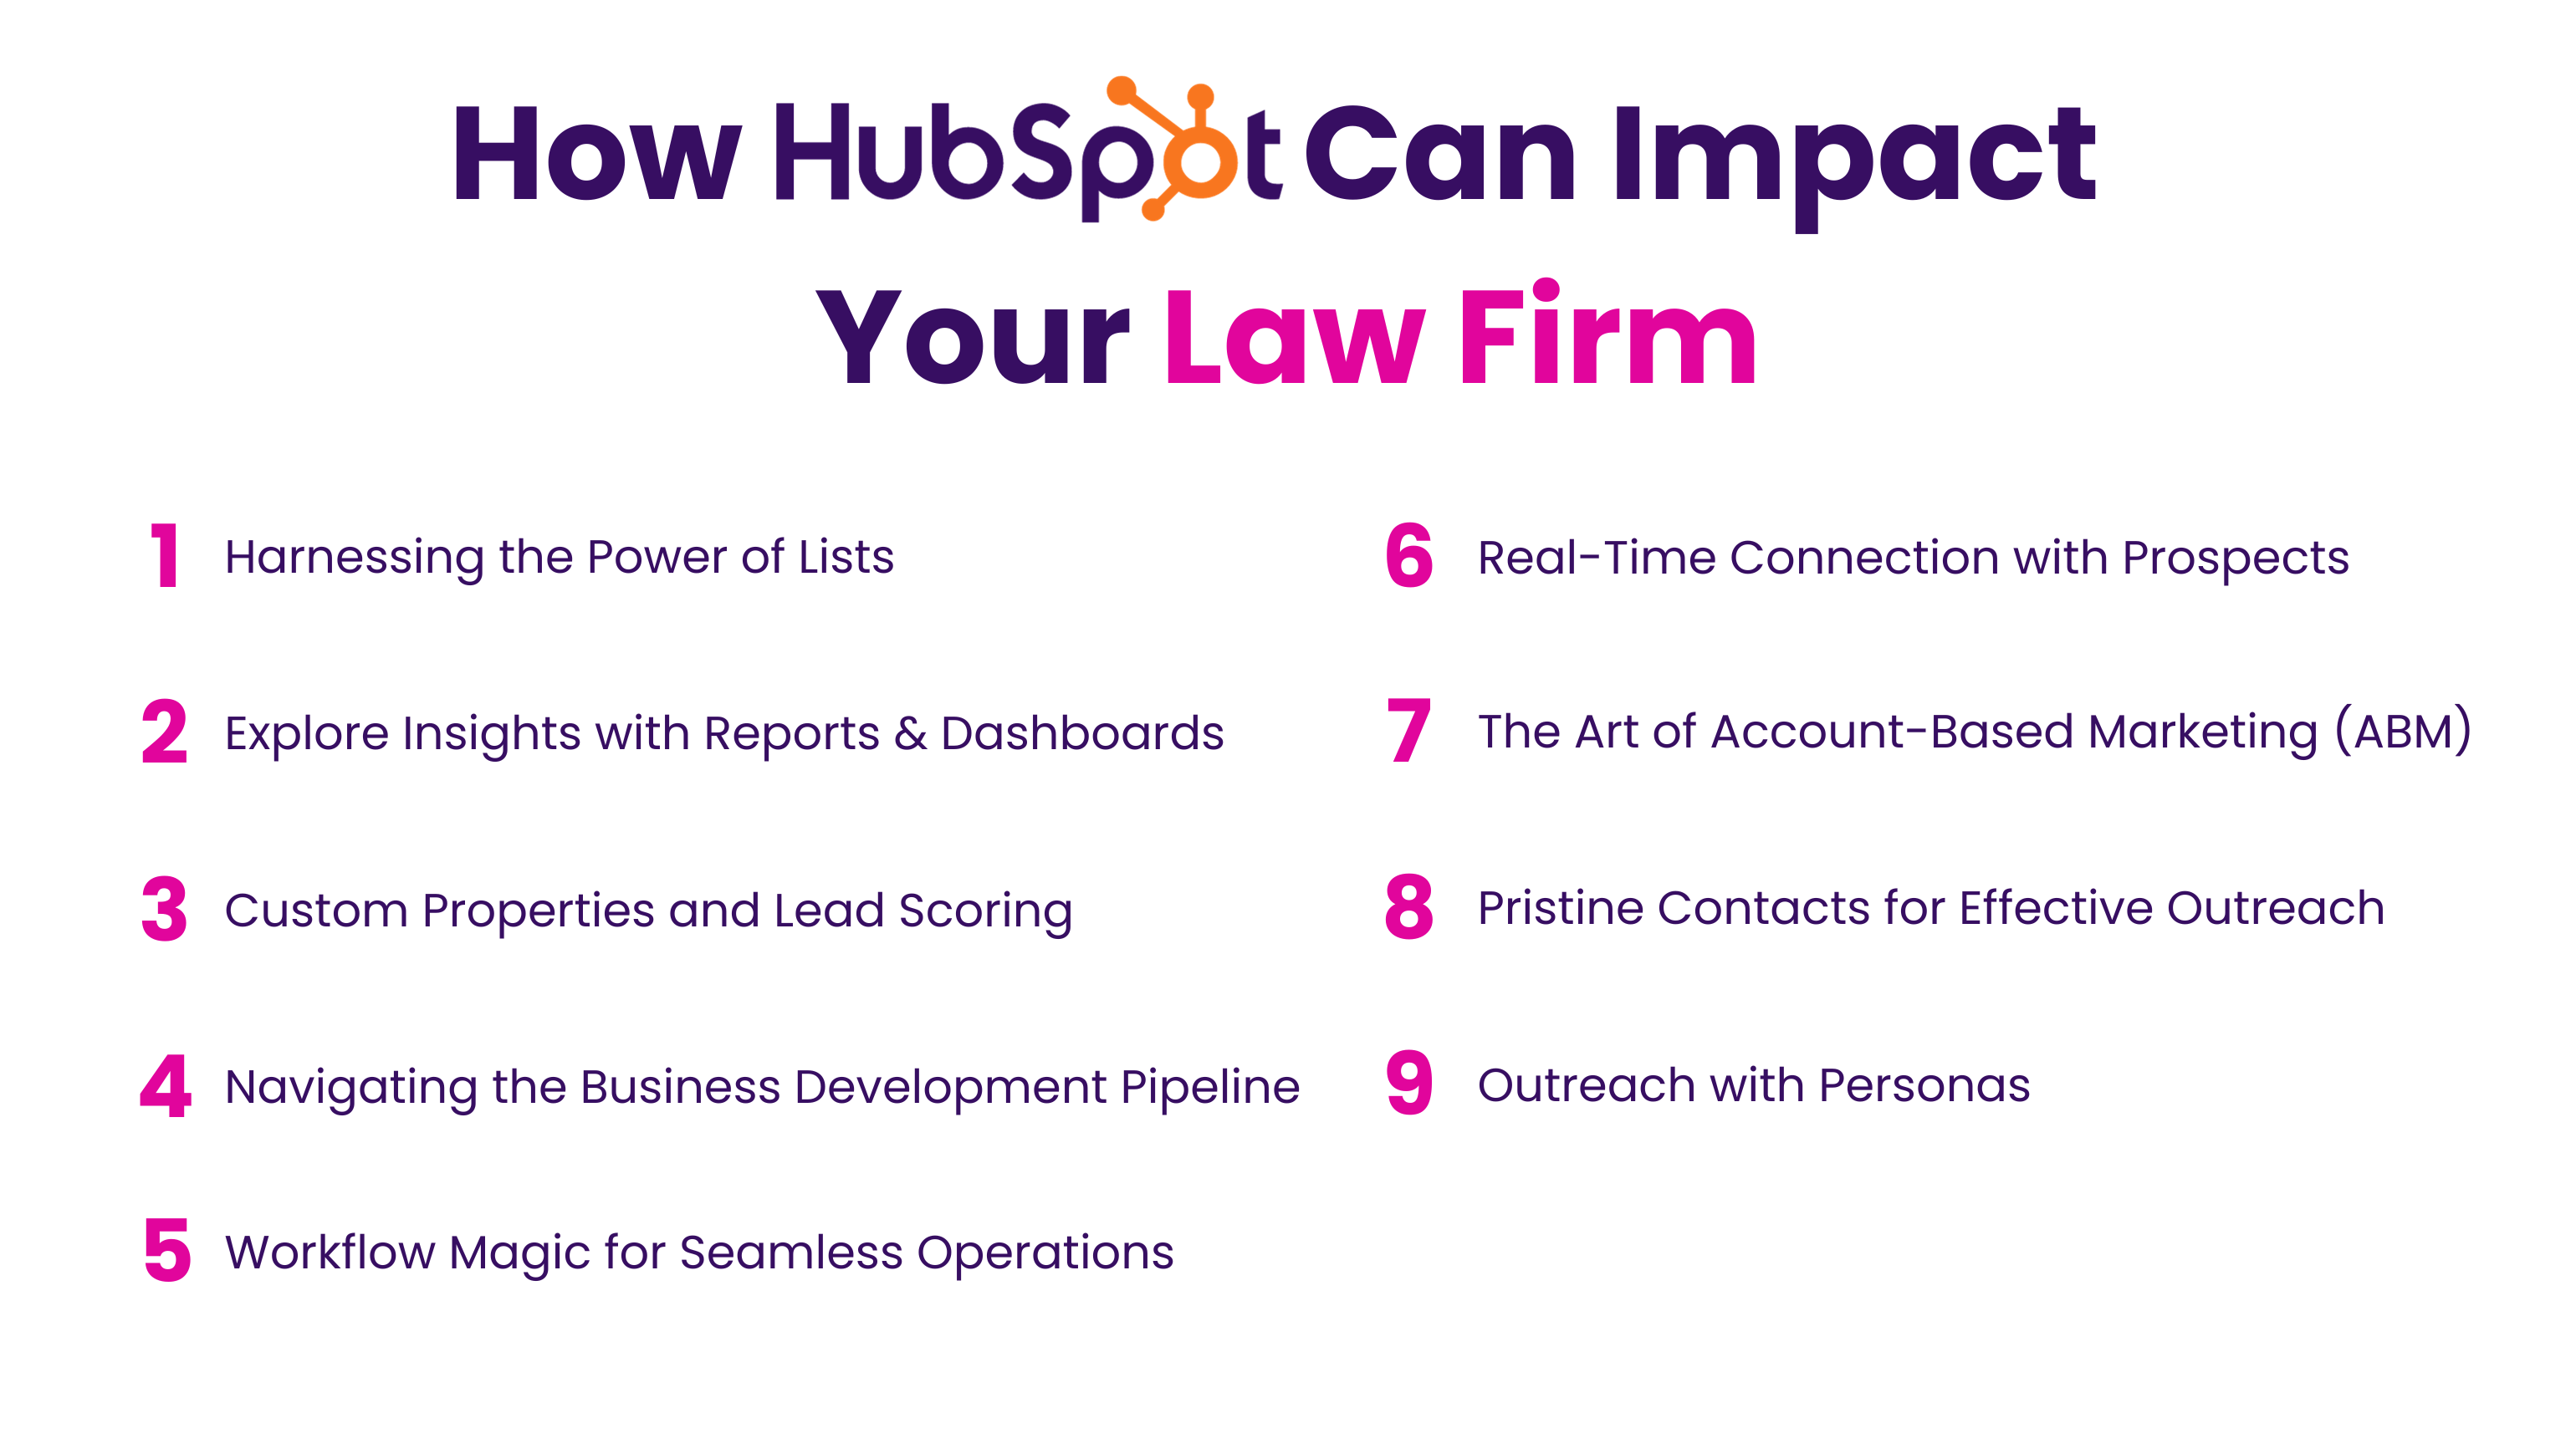 How HubSpot Can Impact Your Law Firm